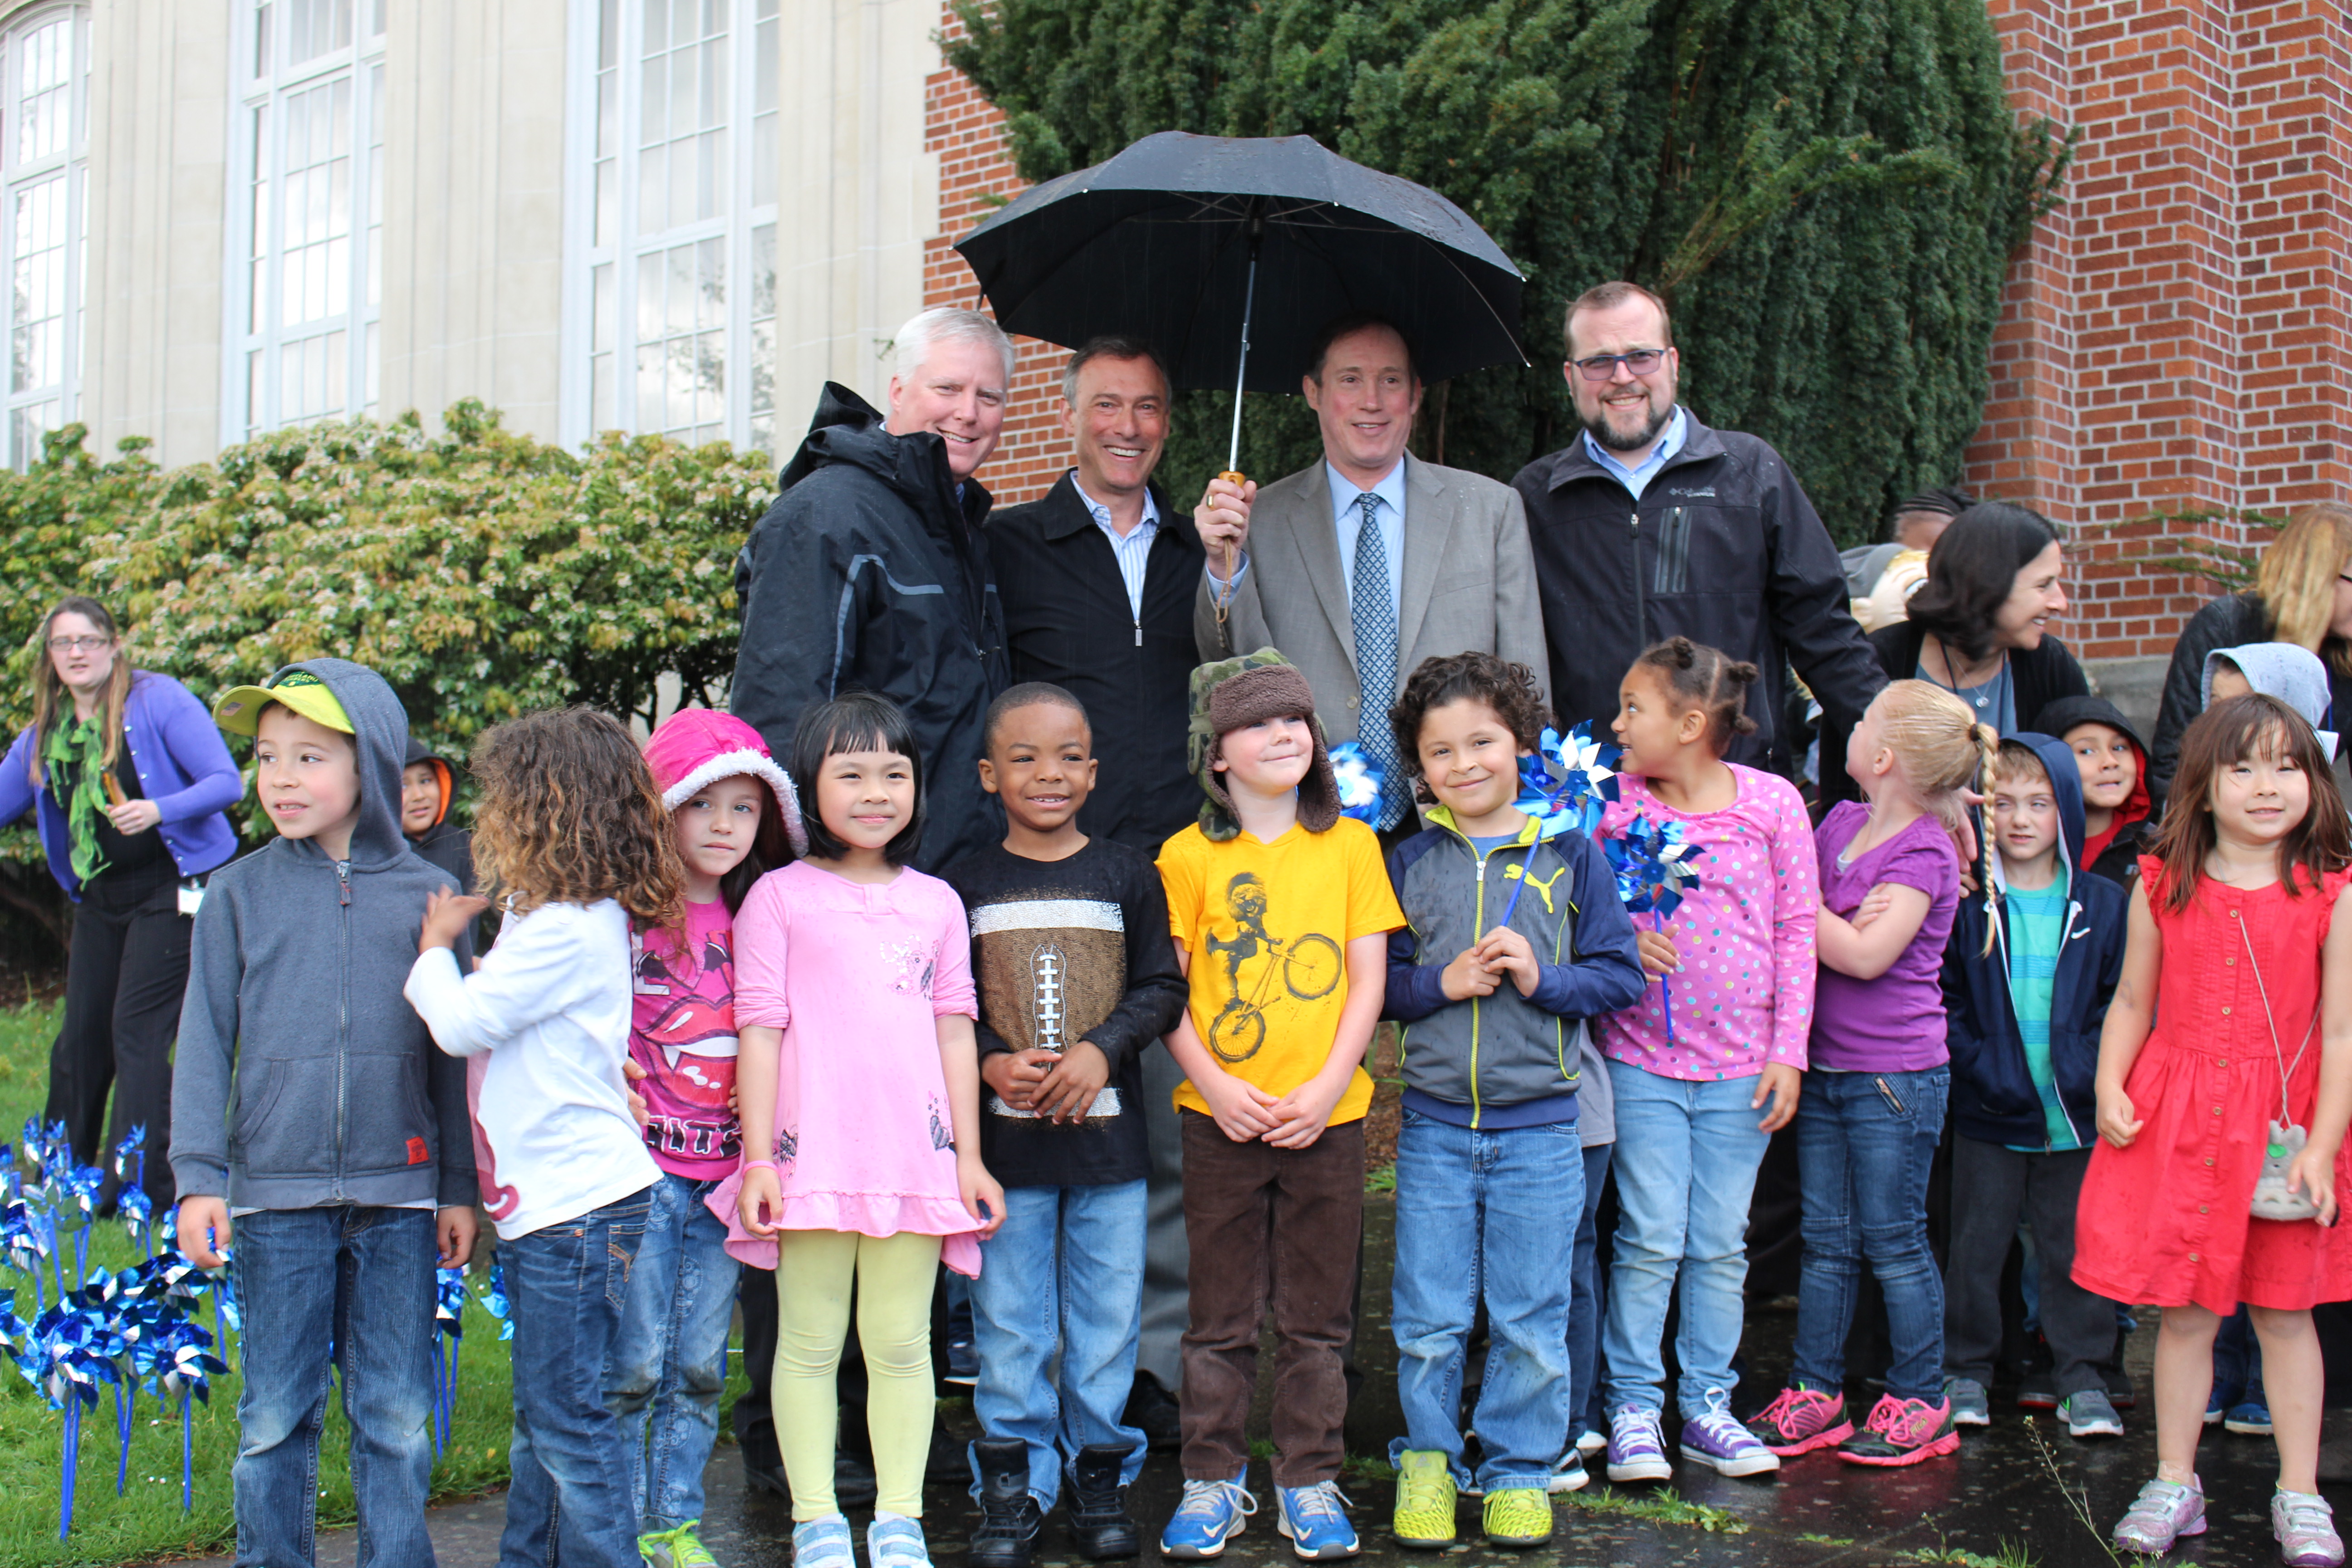 Thank you to PPS Vestal School Kindergarteners, Portland City Commisioner Dan Saltzman, Oregon Department of Education's Ely Sanders-Wilcox, Impact NW's Managing Director Jeff Cogen, CARES Program Manager Kevin Dowling, and Vestal Elementary Principal Emily Glasgow for supporting #ChildAbuseAwarenessMonth by planting pinwheels and speaking about this important topic.